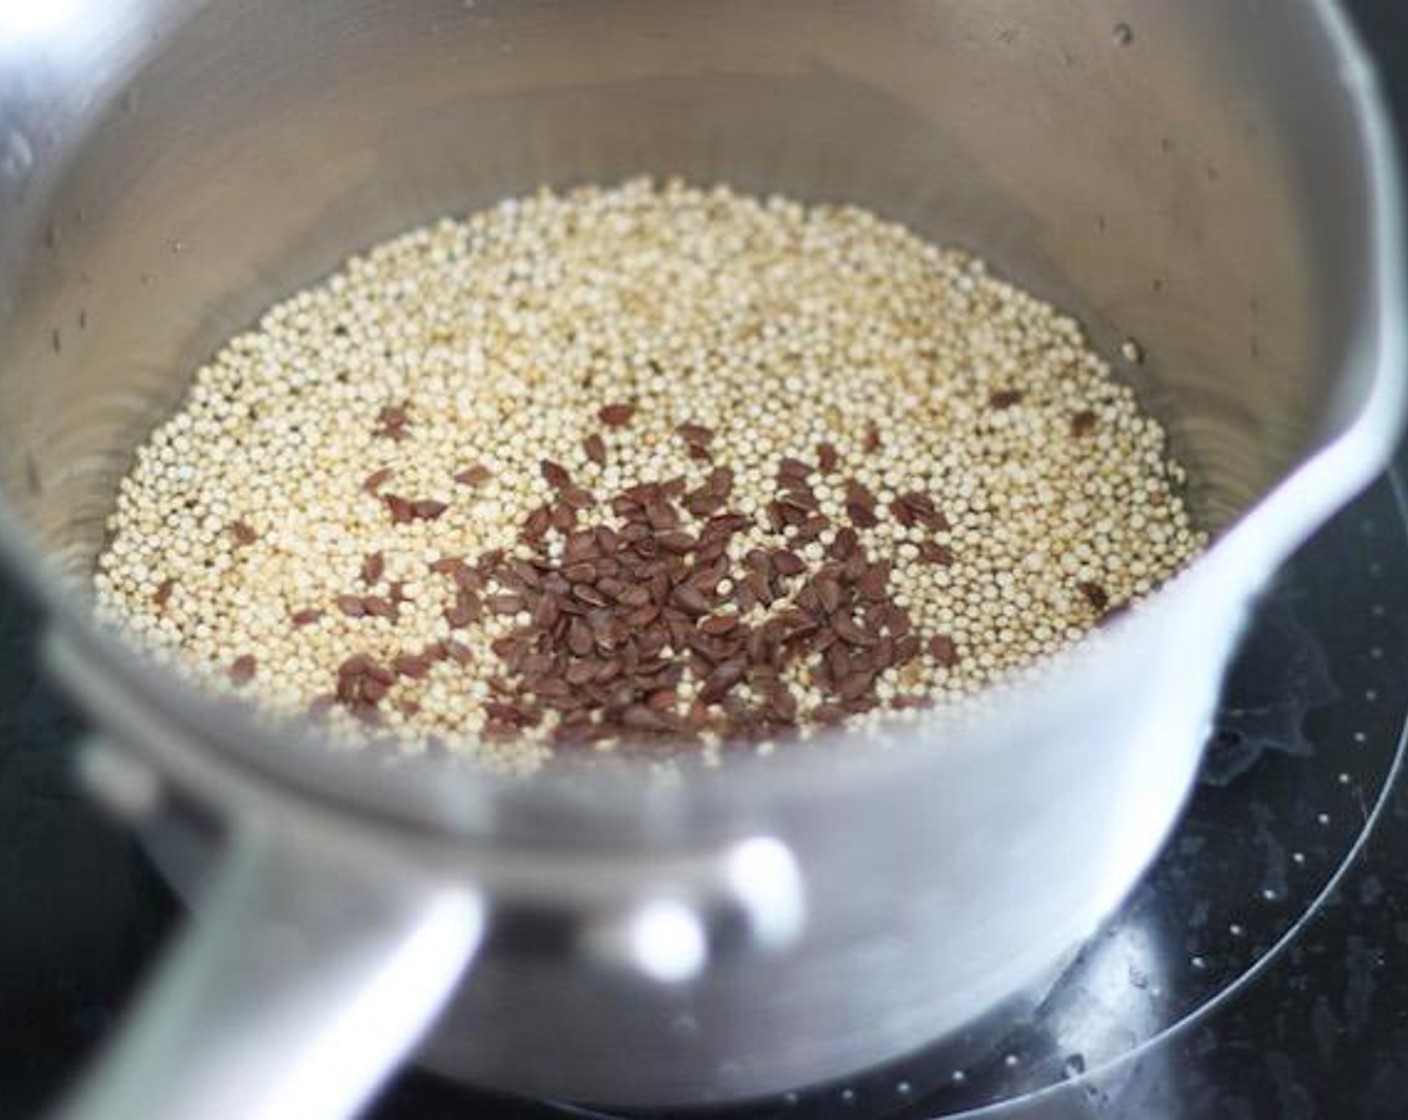 step 1 Put Quinoa (1/2 cup), Flaxseeds (2 Tbsp) and one cup water into a small pot and cook until they become soft. It usually takes about 20-30 minutes.